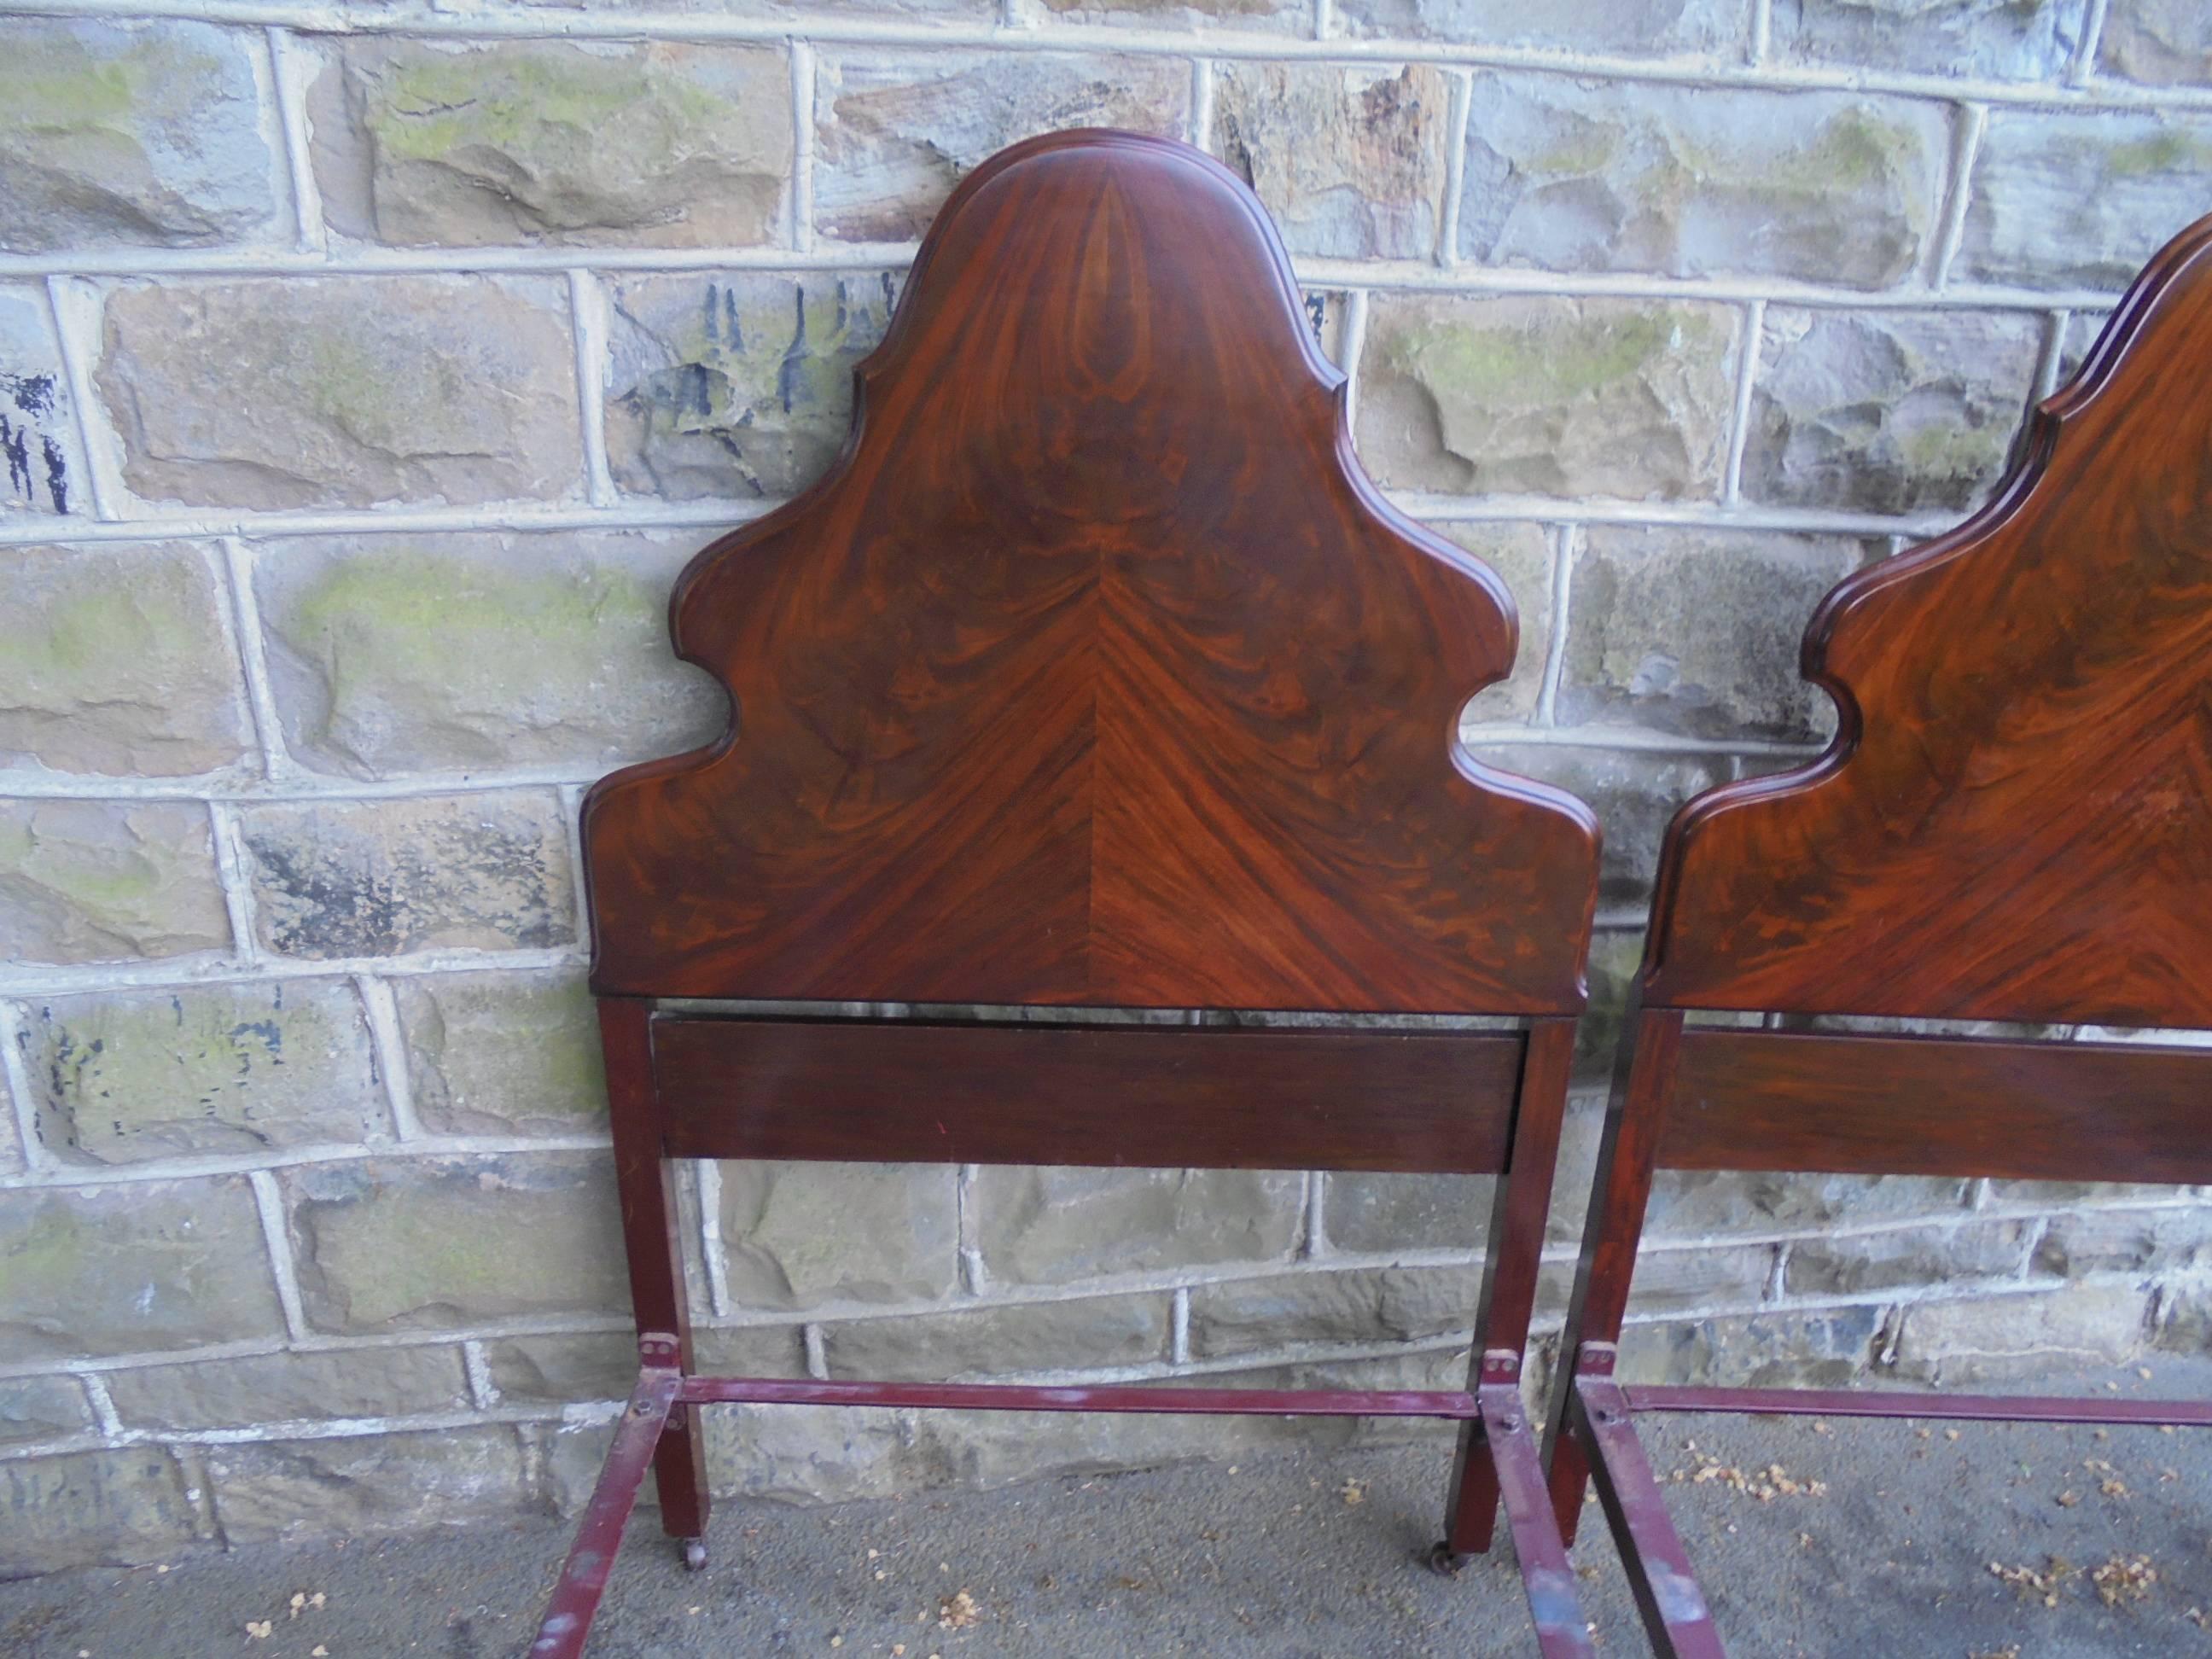 Offered for sale is this good quality pair of antique mahogany single beds

Dating from 1920. Made from solid mahogany. The headboard is a lovely shaped with arched top, and the footboard with scrolling cabriole legs. Really good quality timbers.